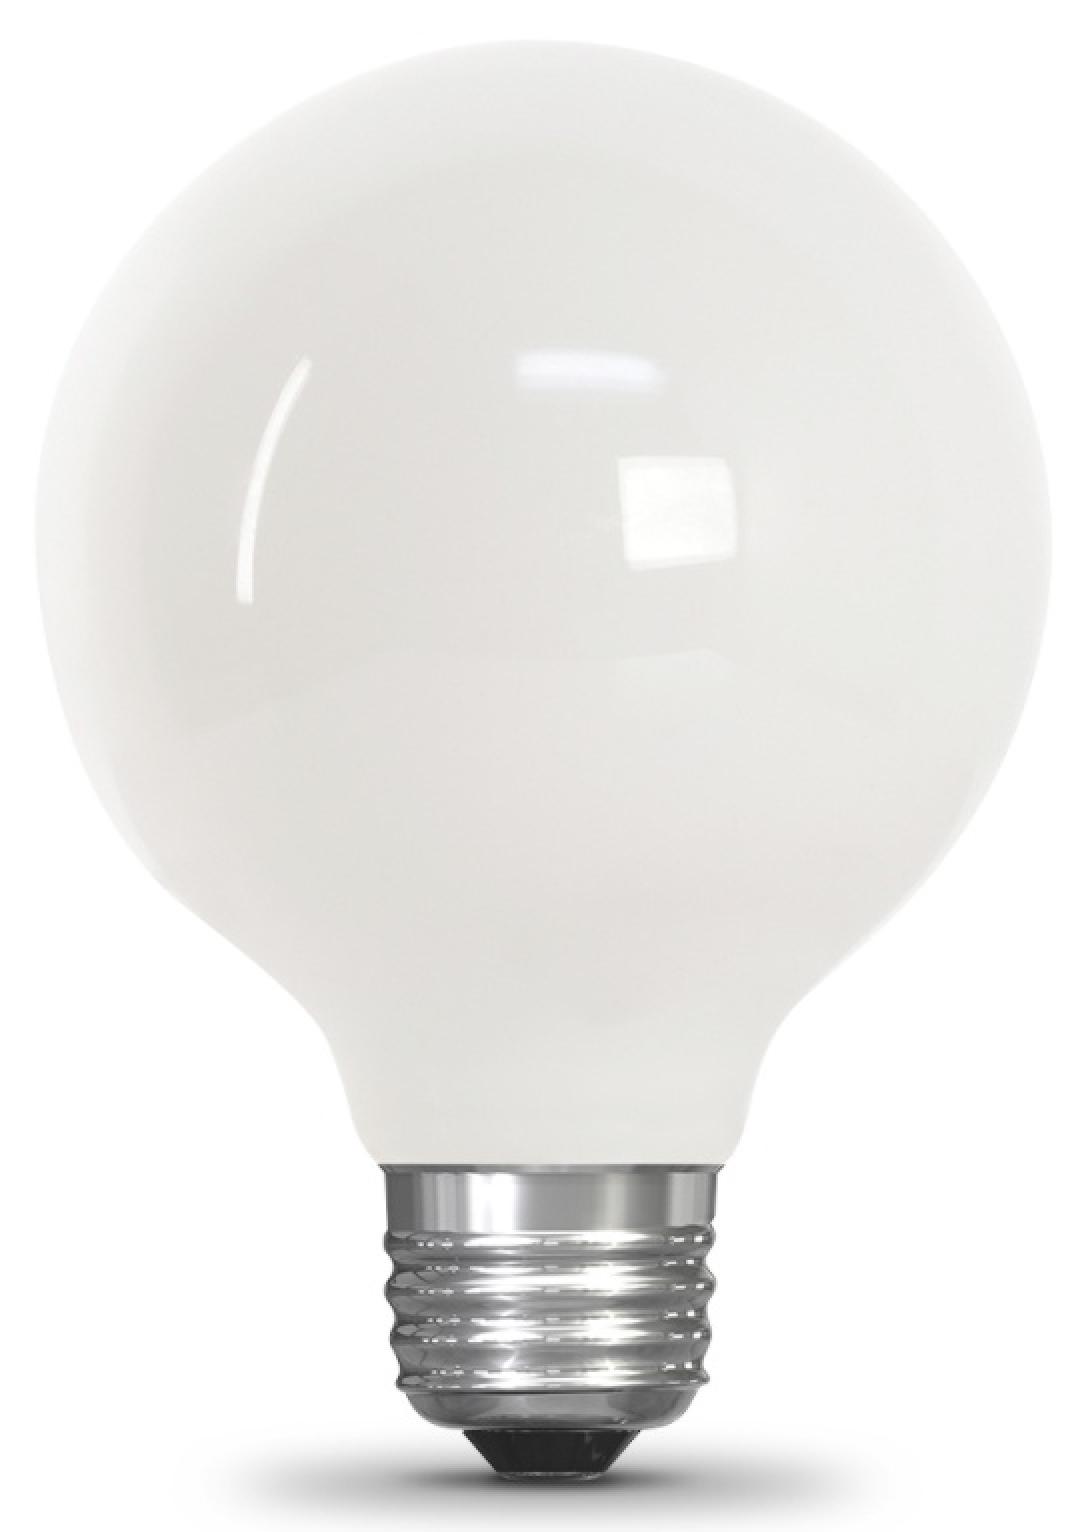 Feit Electric LED 40 Watt Equivalent 350 Lumen Frosted G25 Dimmable Light Bulb